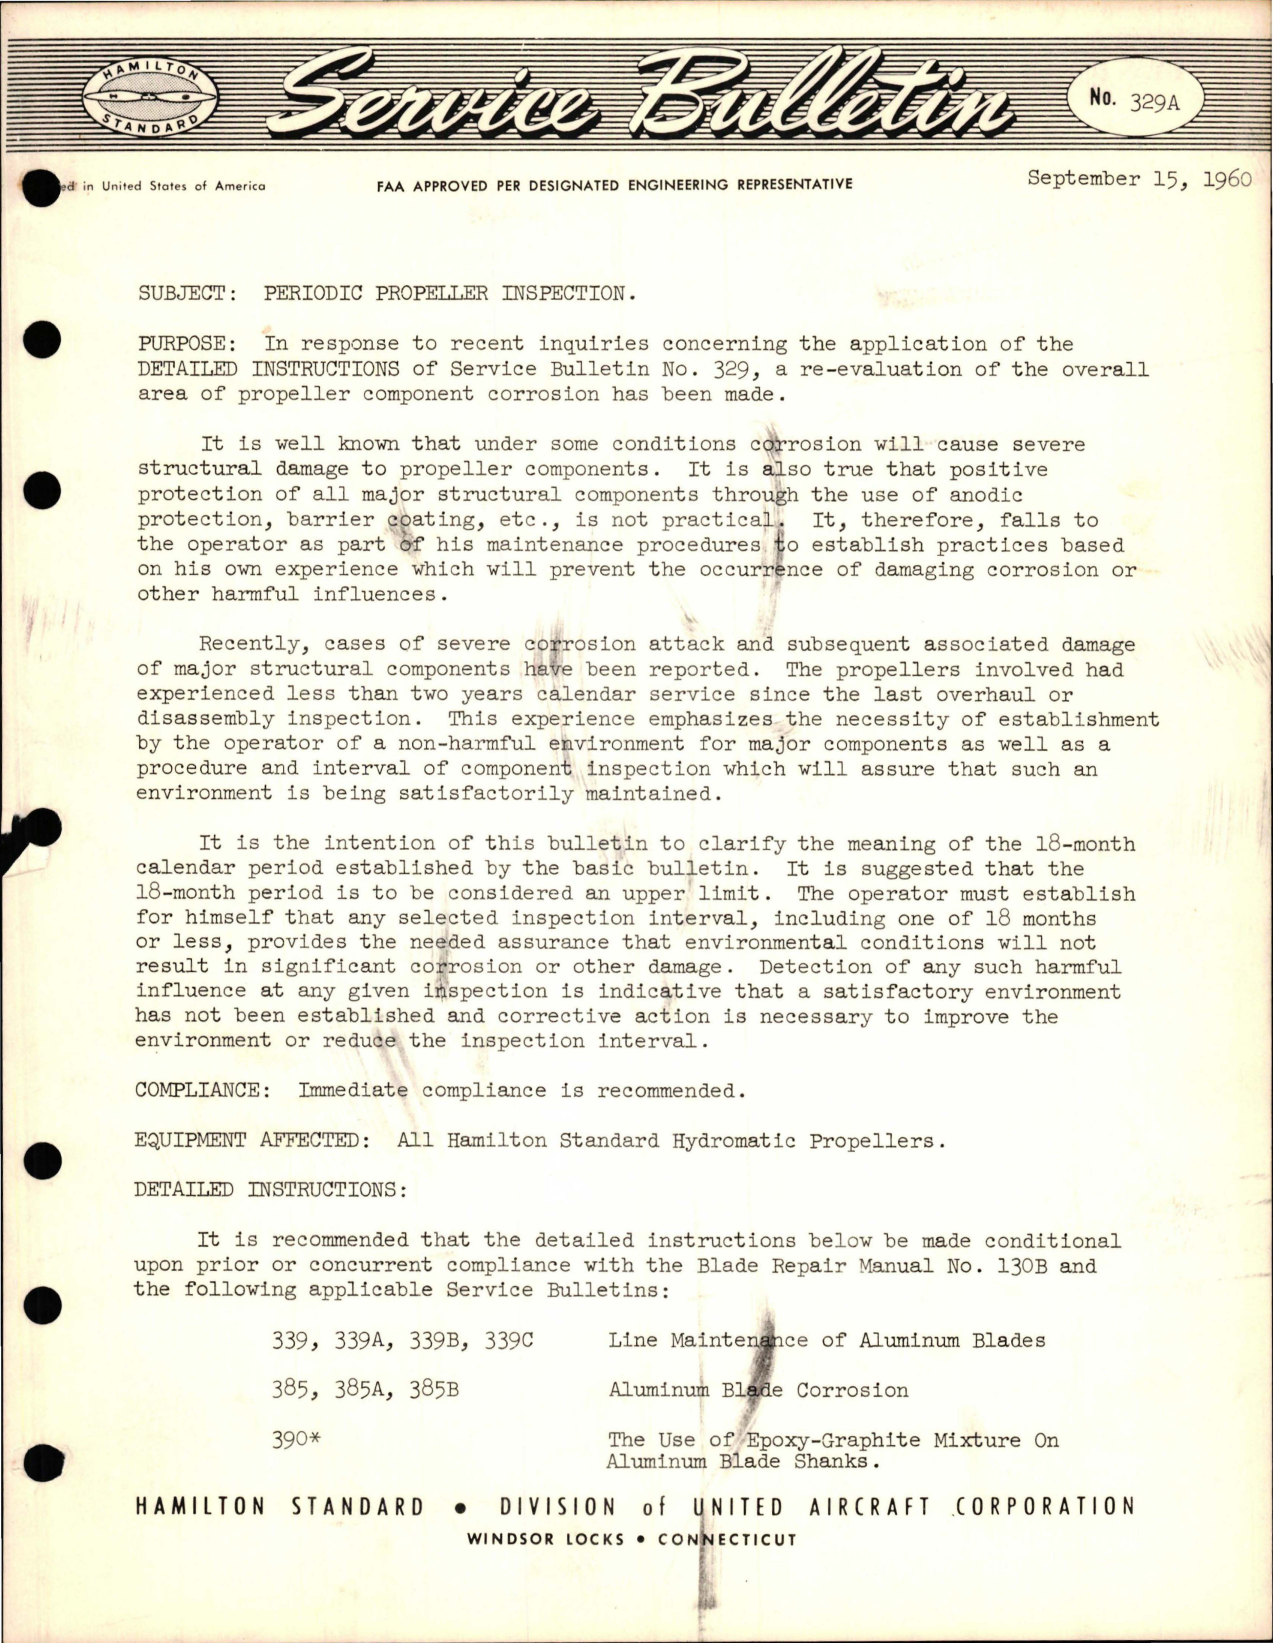 Sample page 1 from AirCorps Library document: Periodic Propeller Inspection